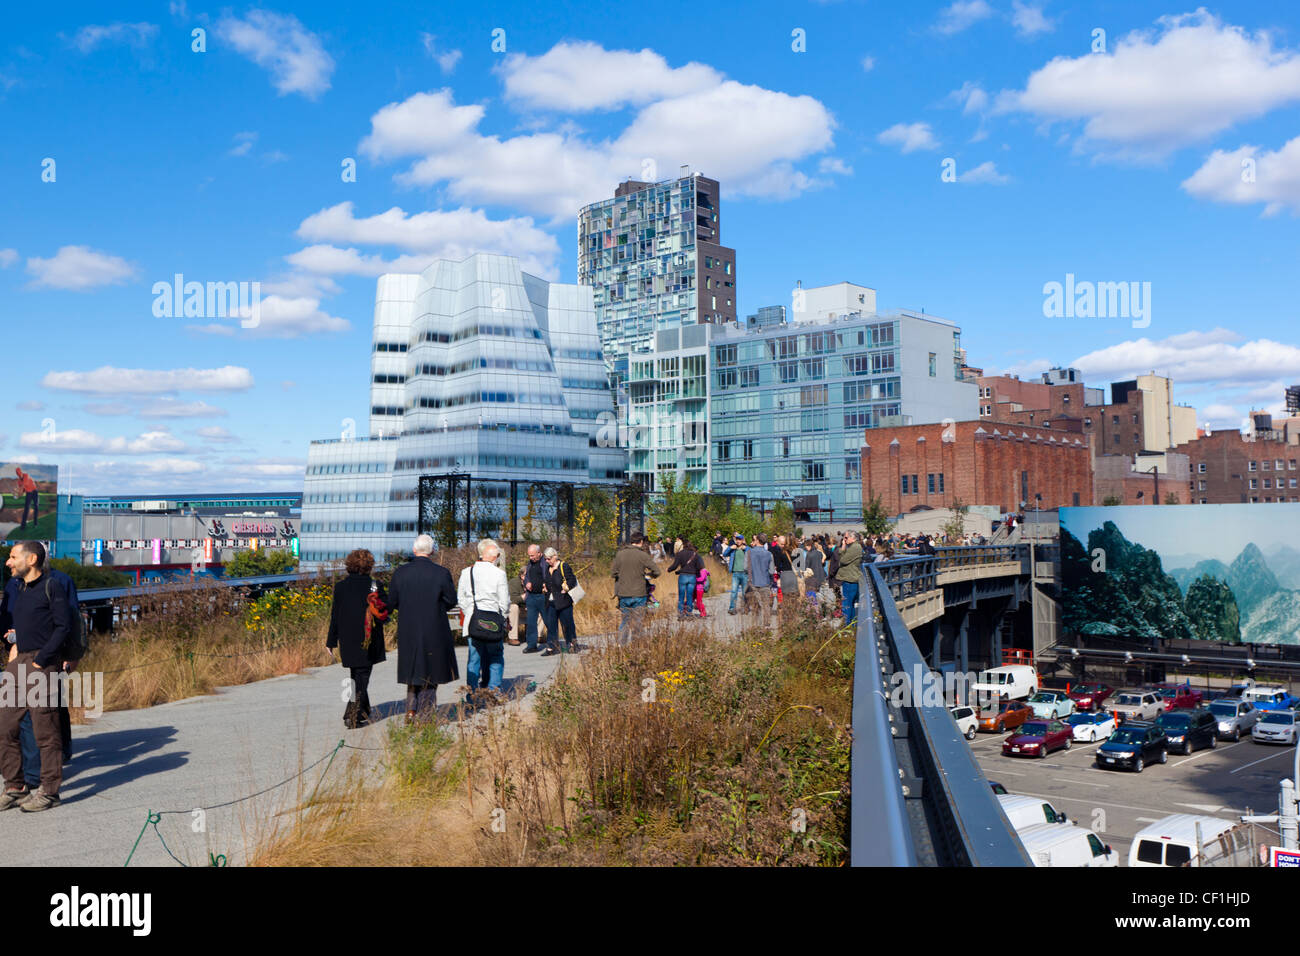 People walking on the High Line Stock Photo